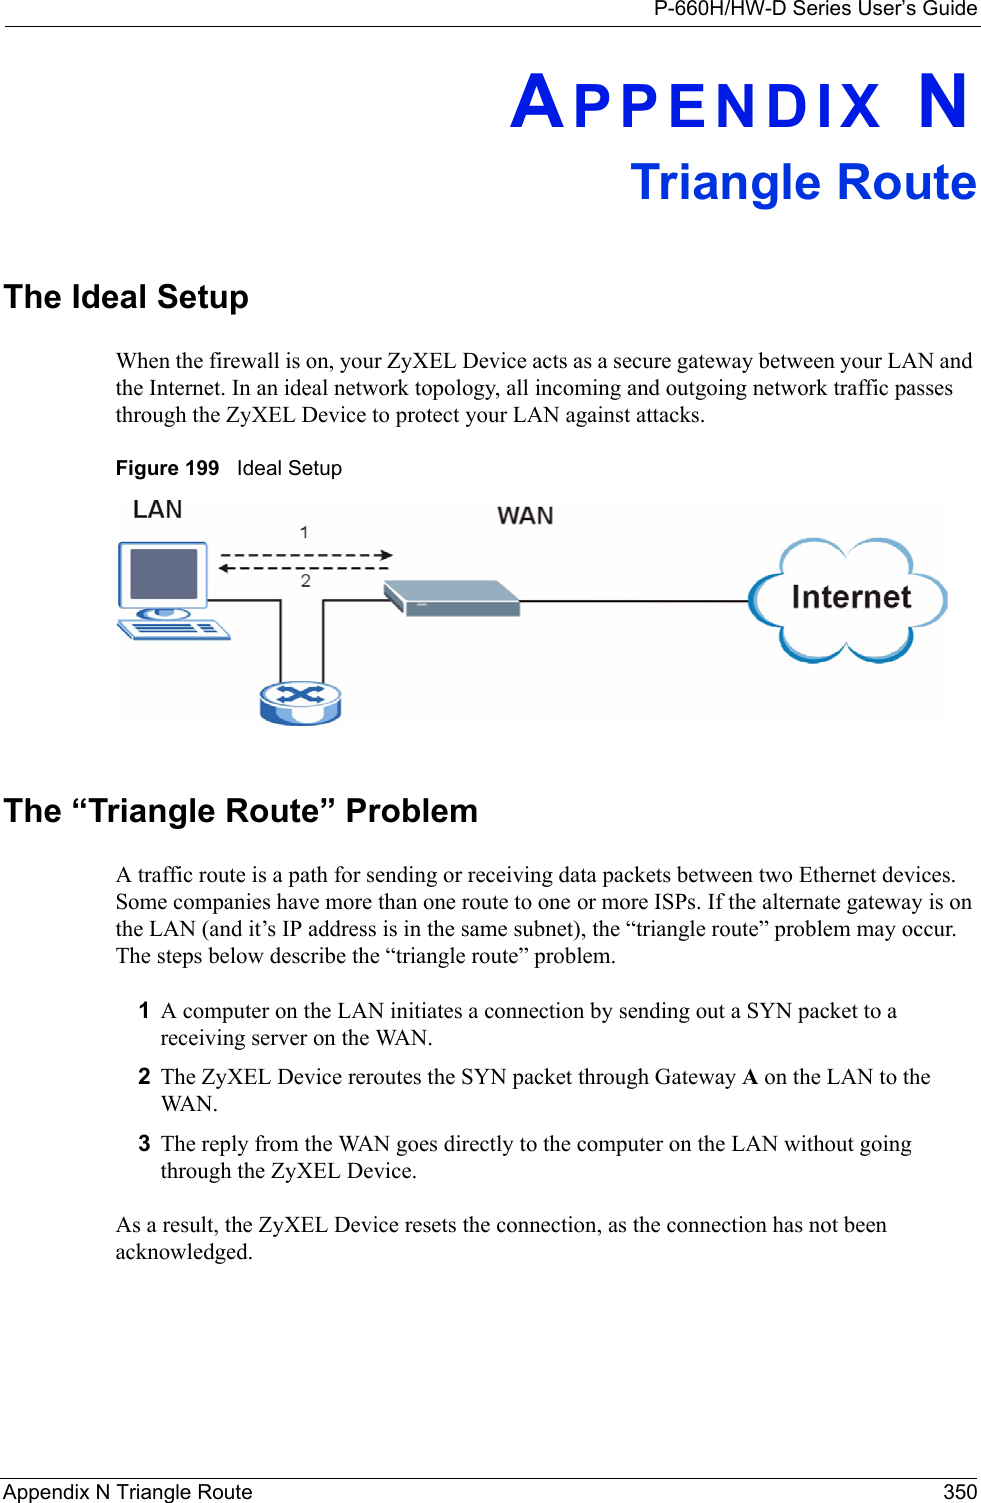 P-660H/HW-D Series User’s GuideAppendix N Triangle Route 350APPENDIX NTriangle RouteThe Ideal Setup When the firewall is on, your ZyXEL Device acts as a secure gateway between your LAN and the Internet. In an ideal network topology, all incoming and outgoing network traffic passes through the ZyXEL Device to protect your LAN against attacks.Figure 199   Ideal SetupThe “Triangle Route” ProblemA traffic route is a path for sending or receiving data packets between two Ethernet devices. Some companies have more than one route to one or more ISPs. If the alternate gateway is on the LAN (and it’s IP address is in the same subnet), the “triangle route” problem may occur. The steps below describe the “triangle route” problem. 1A computer on the LAN initiates a connection by sending out a SYN packet to a receiving server on the WAN.2The ZyXEL Device reroutes the SYN packet through Gateway A on the LAN to the WA N.  3The reply from the WAN goes directly to the computer on the LAN without going through the ZyXEL Device. As a result, the ZyXEL Device resets the connection, as the connection has not been acknowledged.